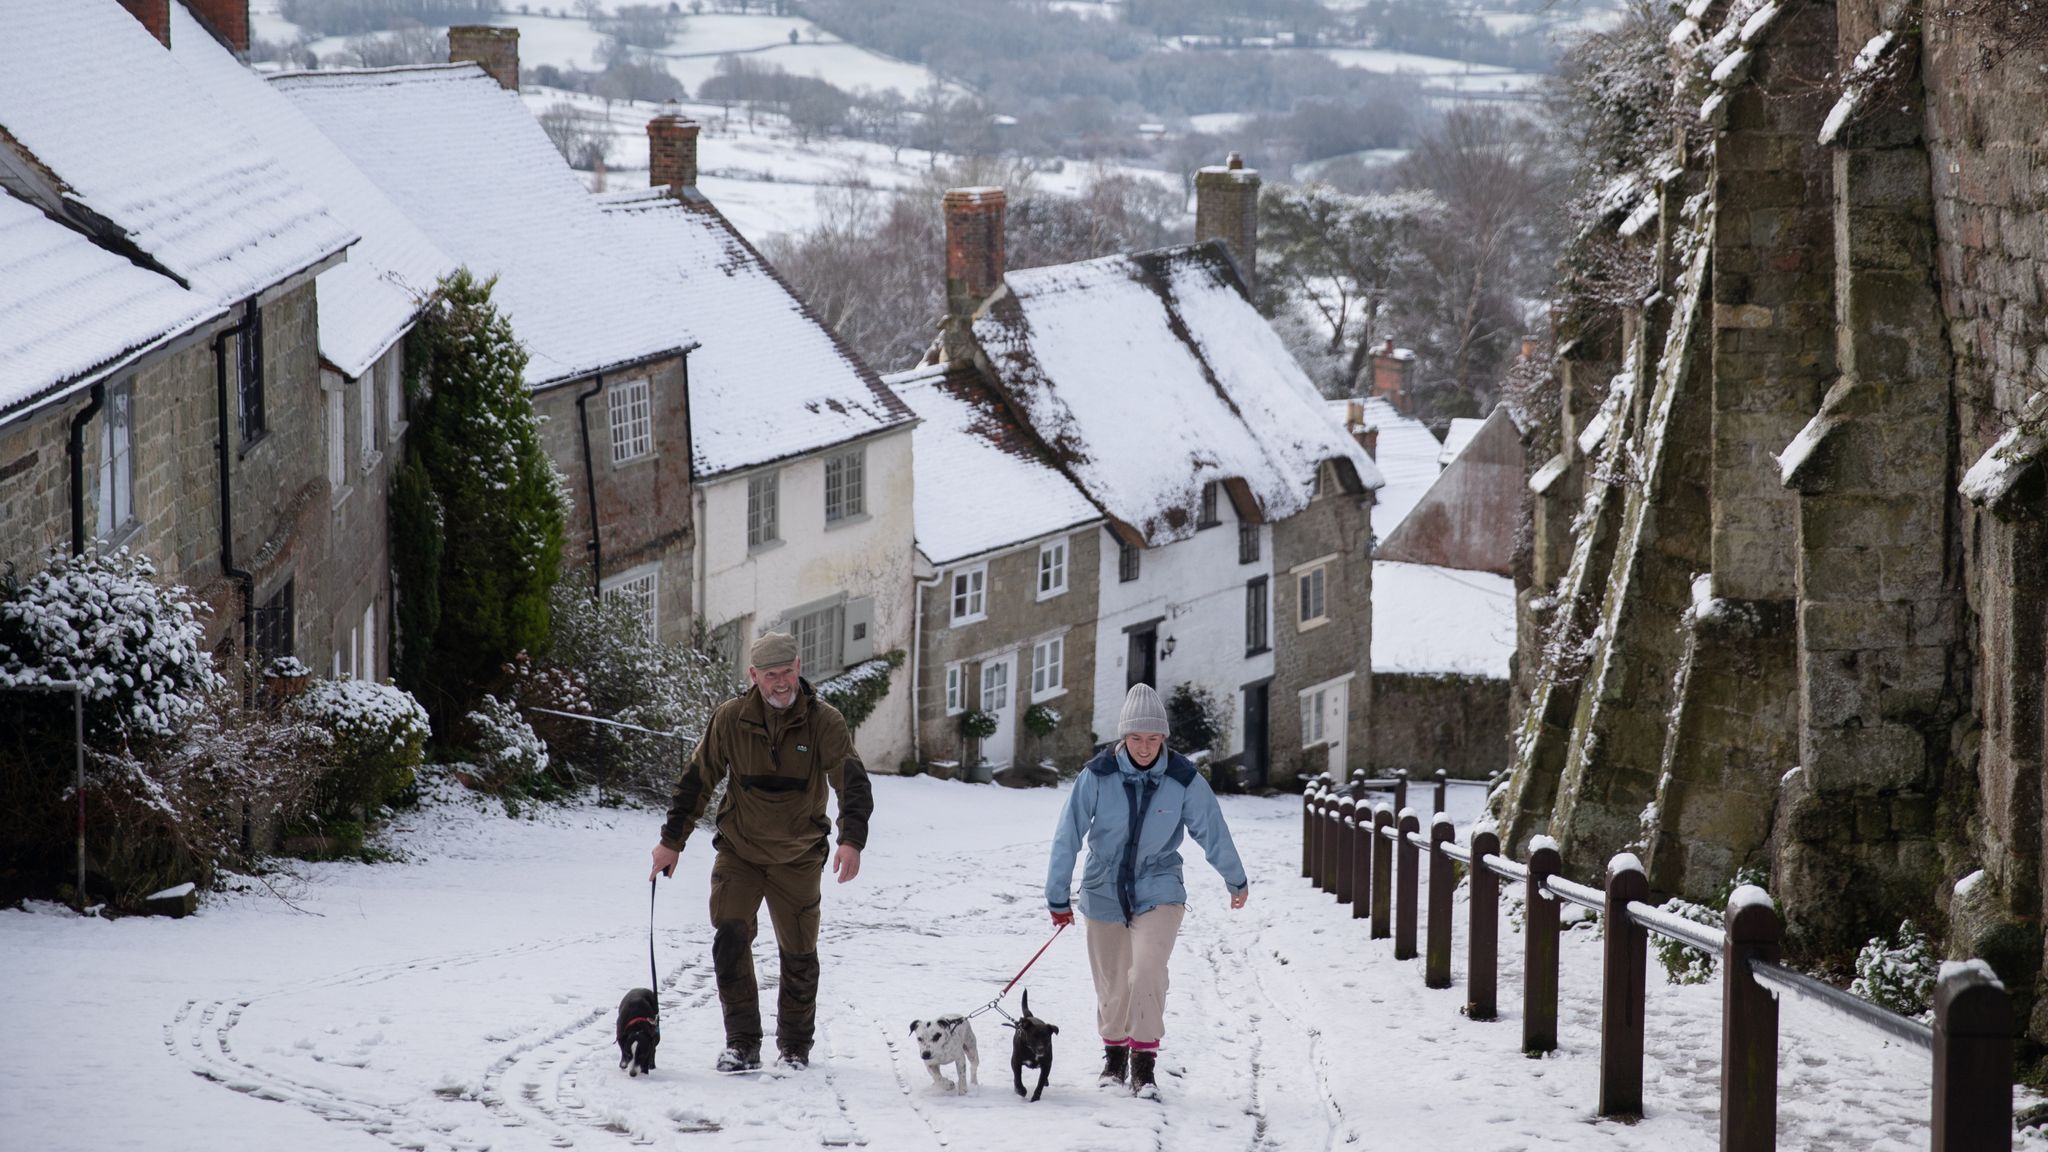 Winter tightens its grip on the UK More subzero temperatures and